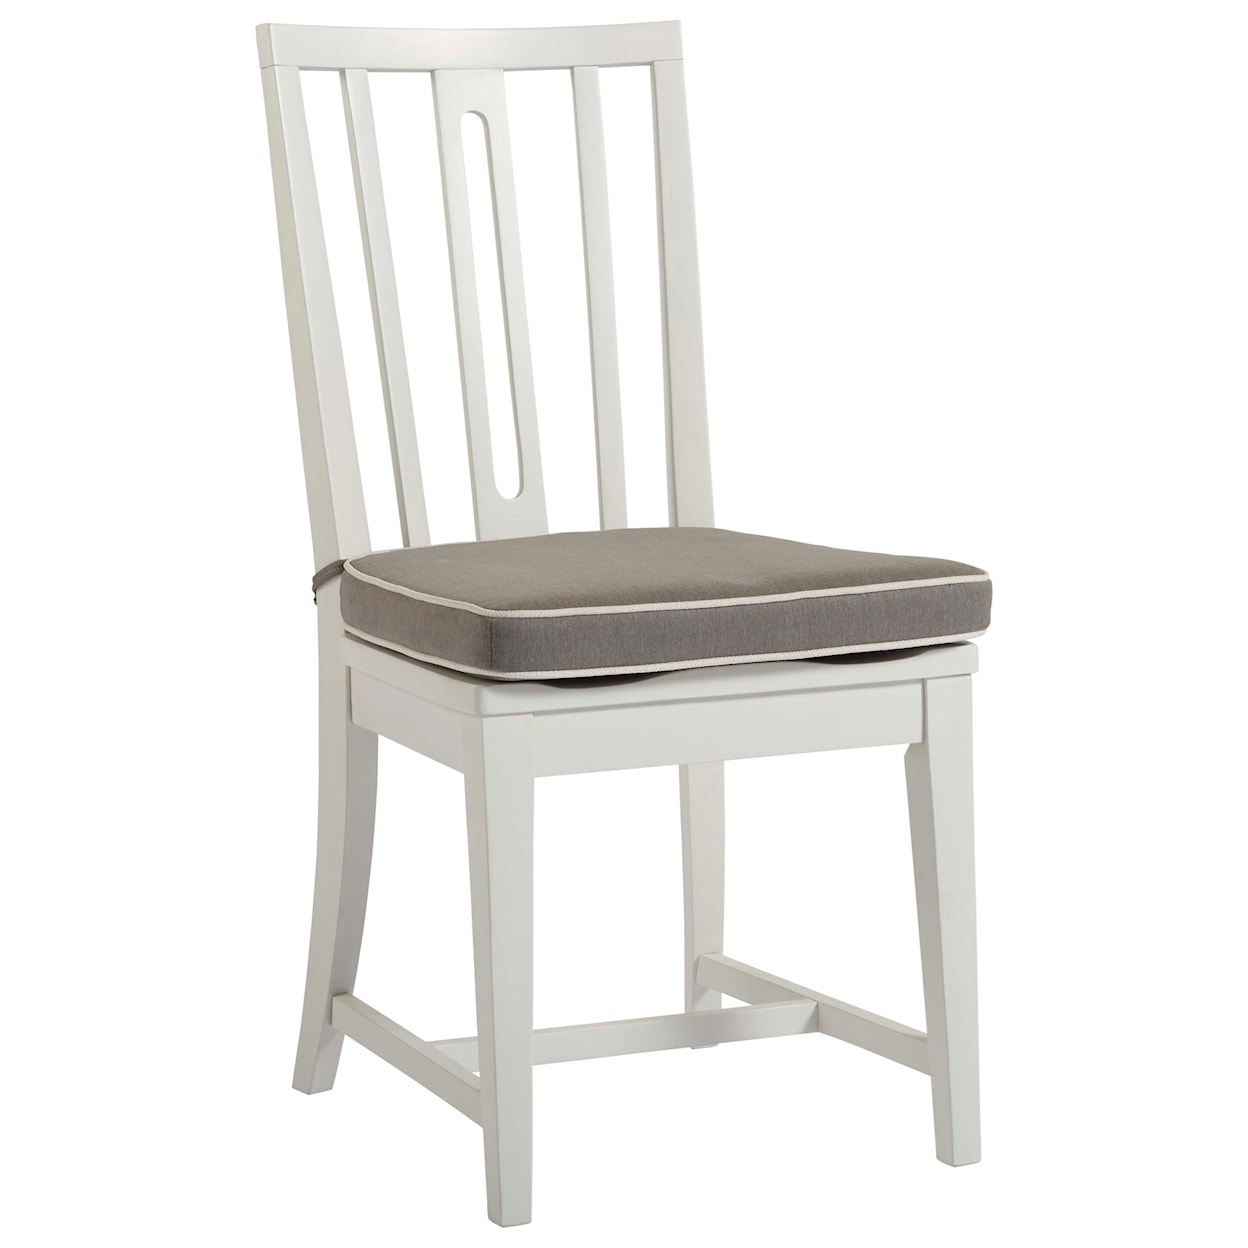 Universal Escape-Coastal Living Home Collection Kitchen Dining Chair